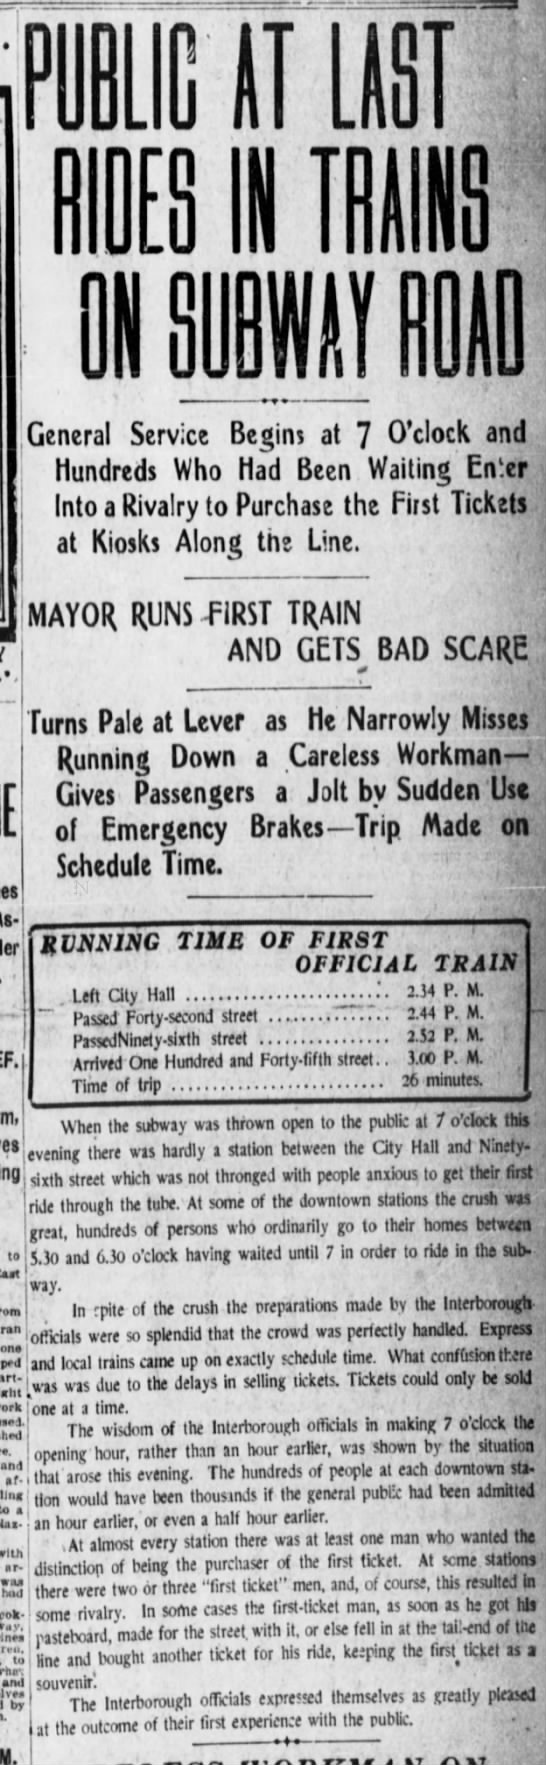 Newspaper article about the opening day of the New York City subway in 1904 - 